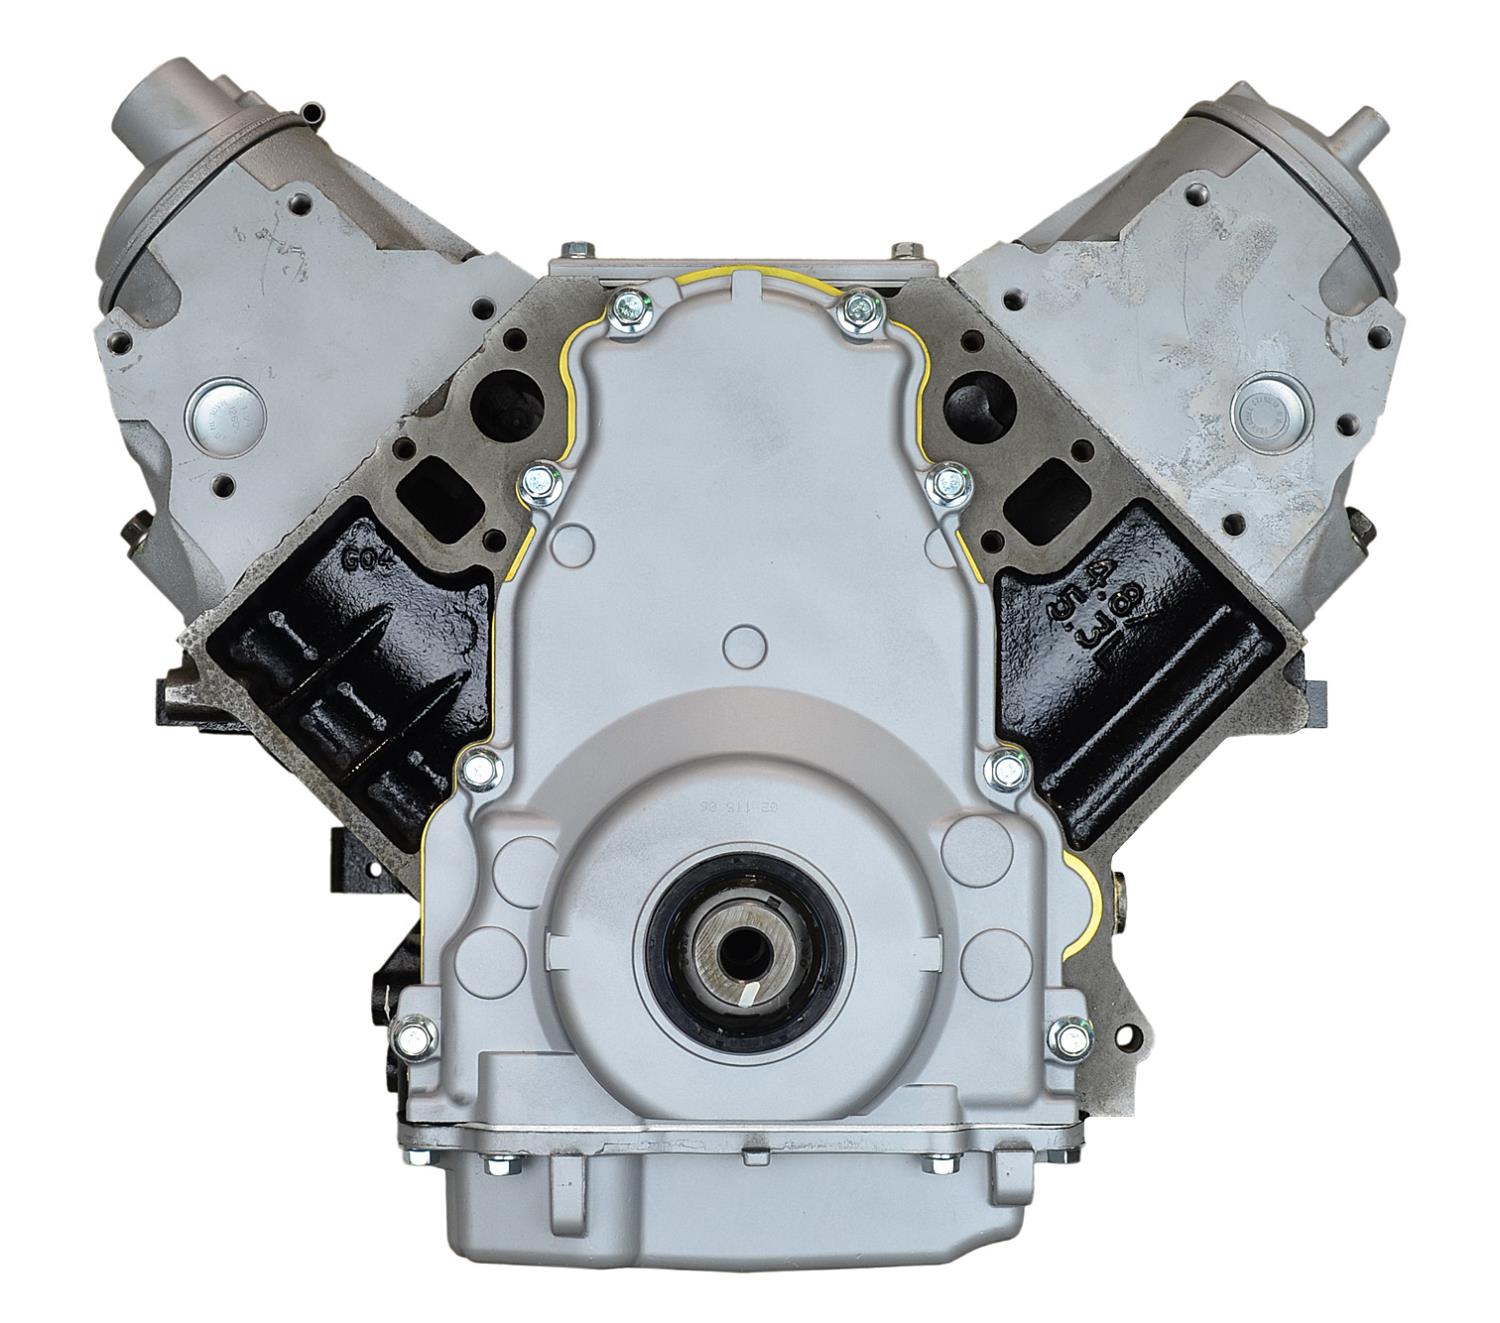 Remanufactured Crate Engine for 1999-2007 Chevy/GMC Truck, SUV, & Van with 5.3L V8